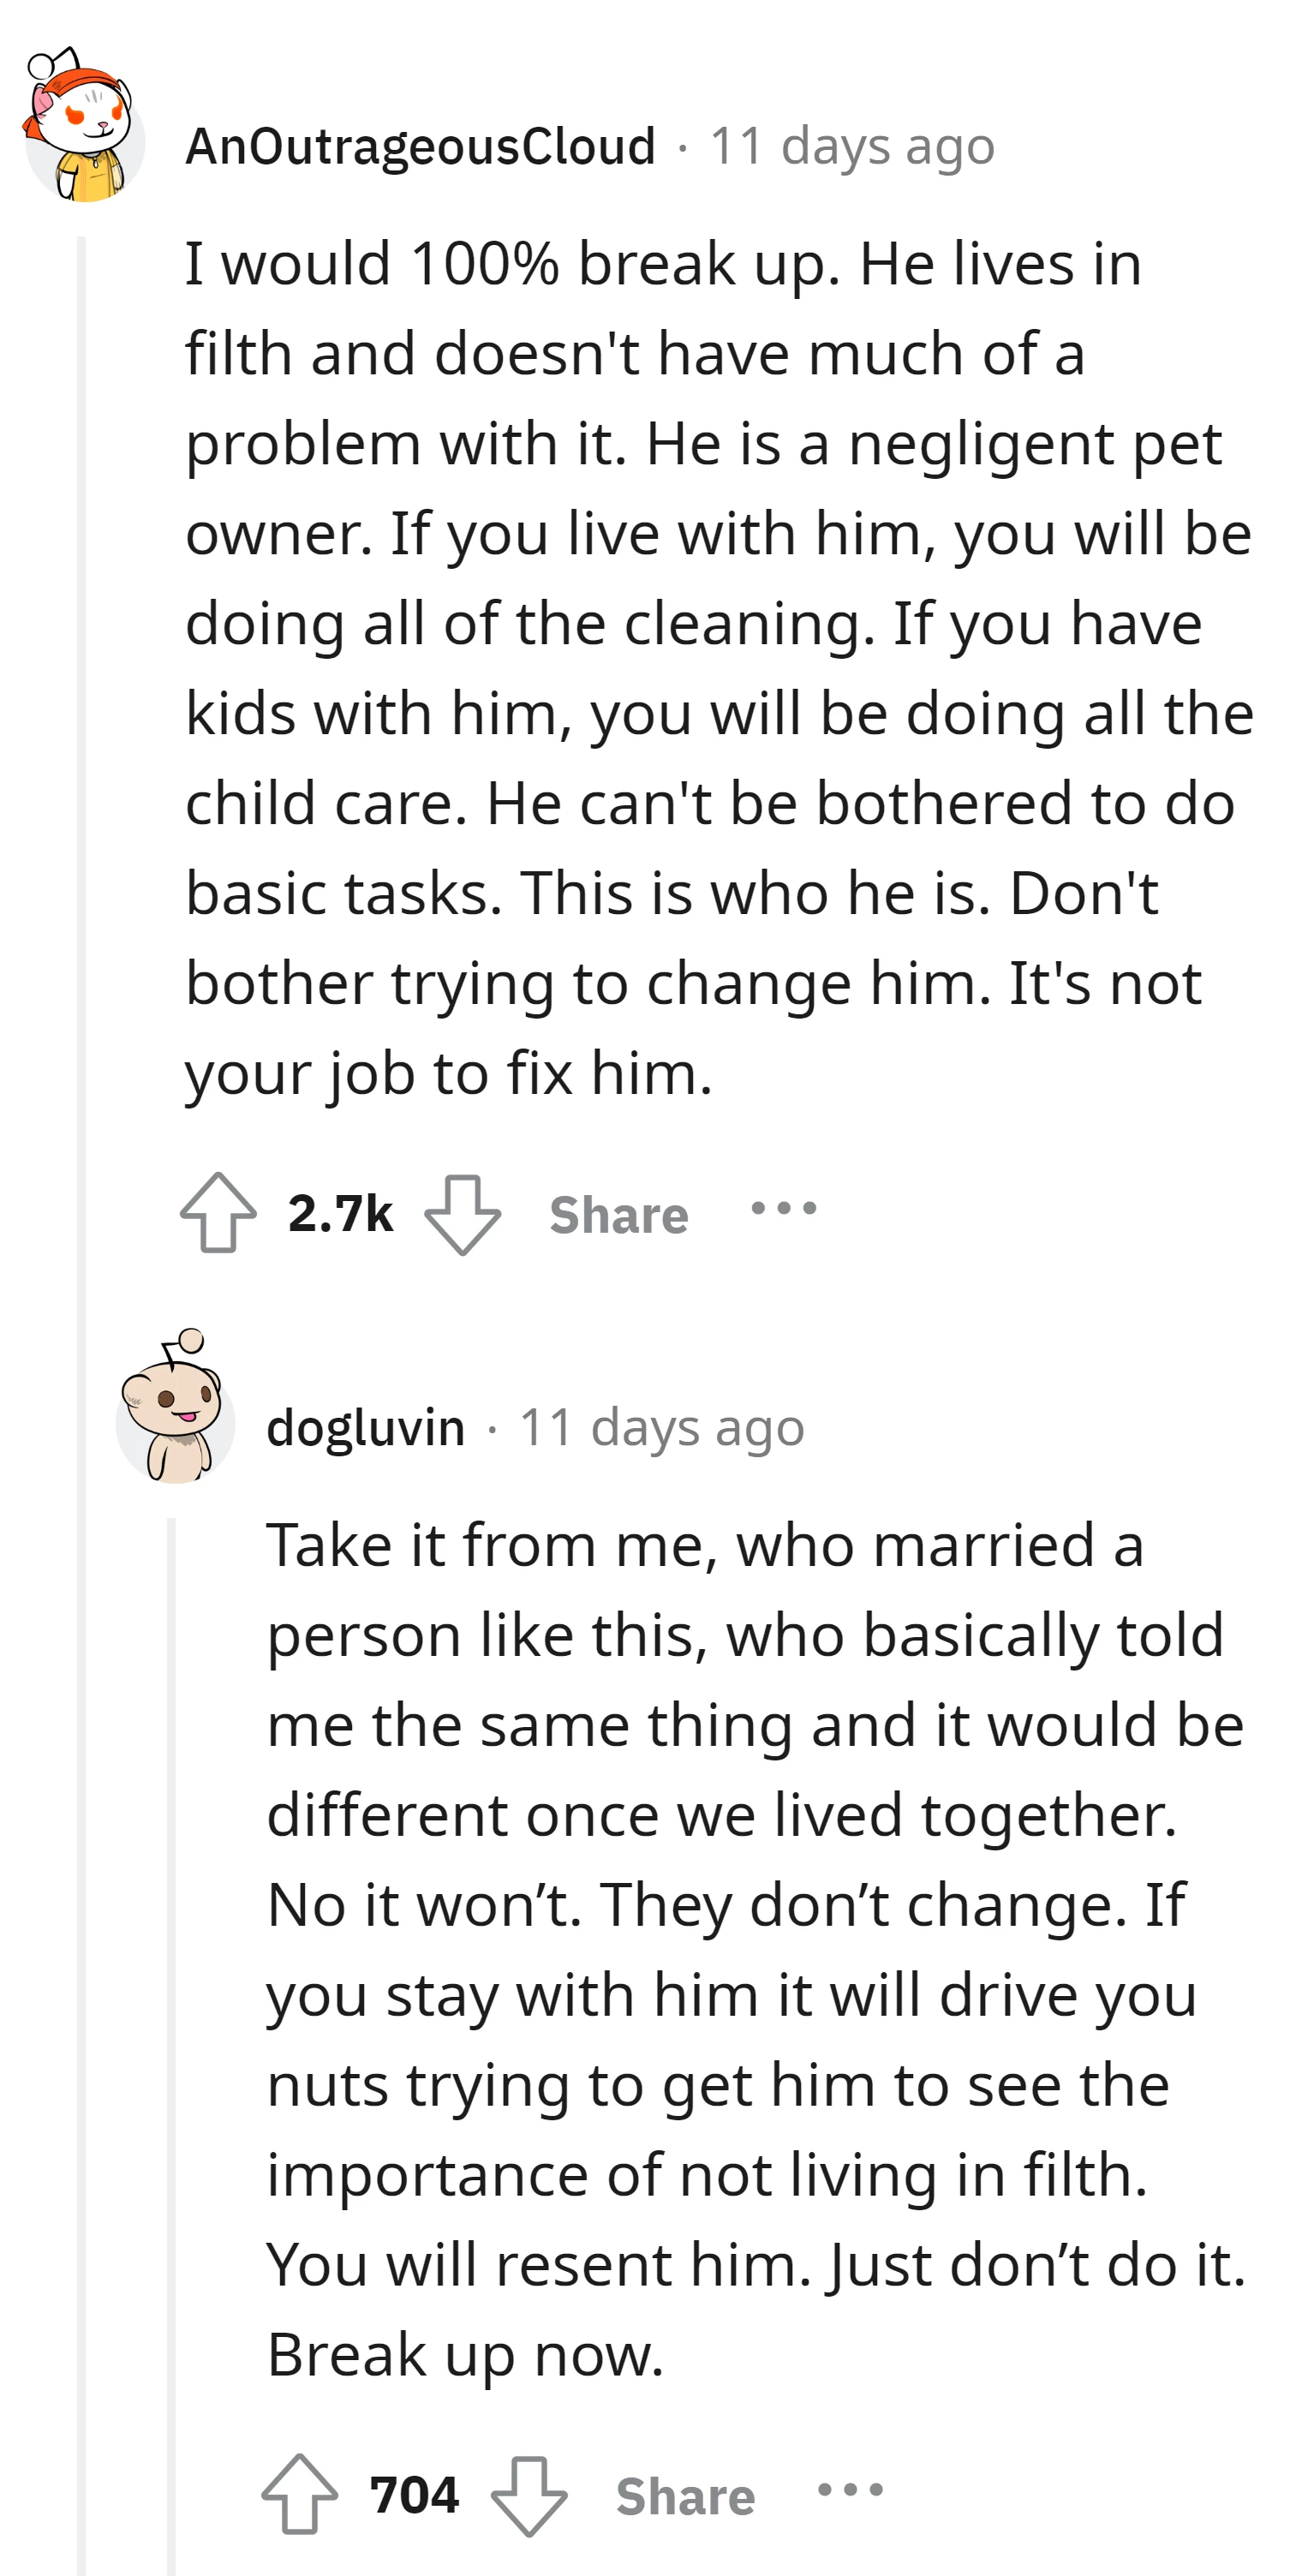 Redditor strongly advises the OP to break up